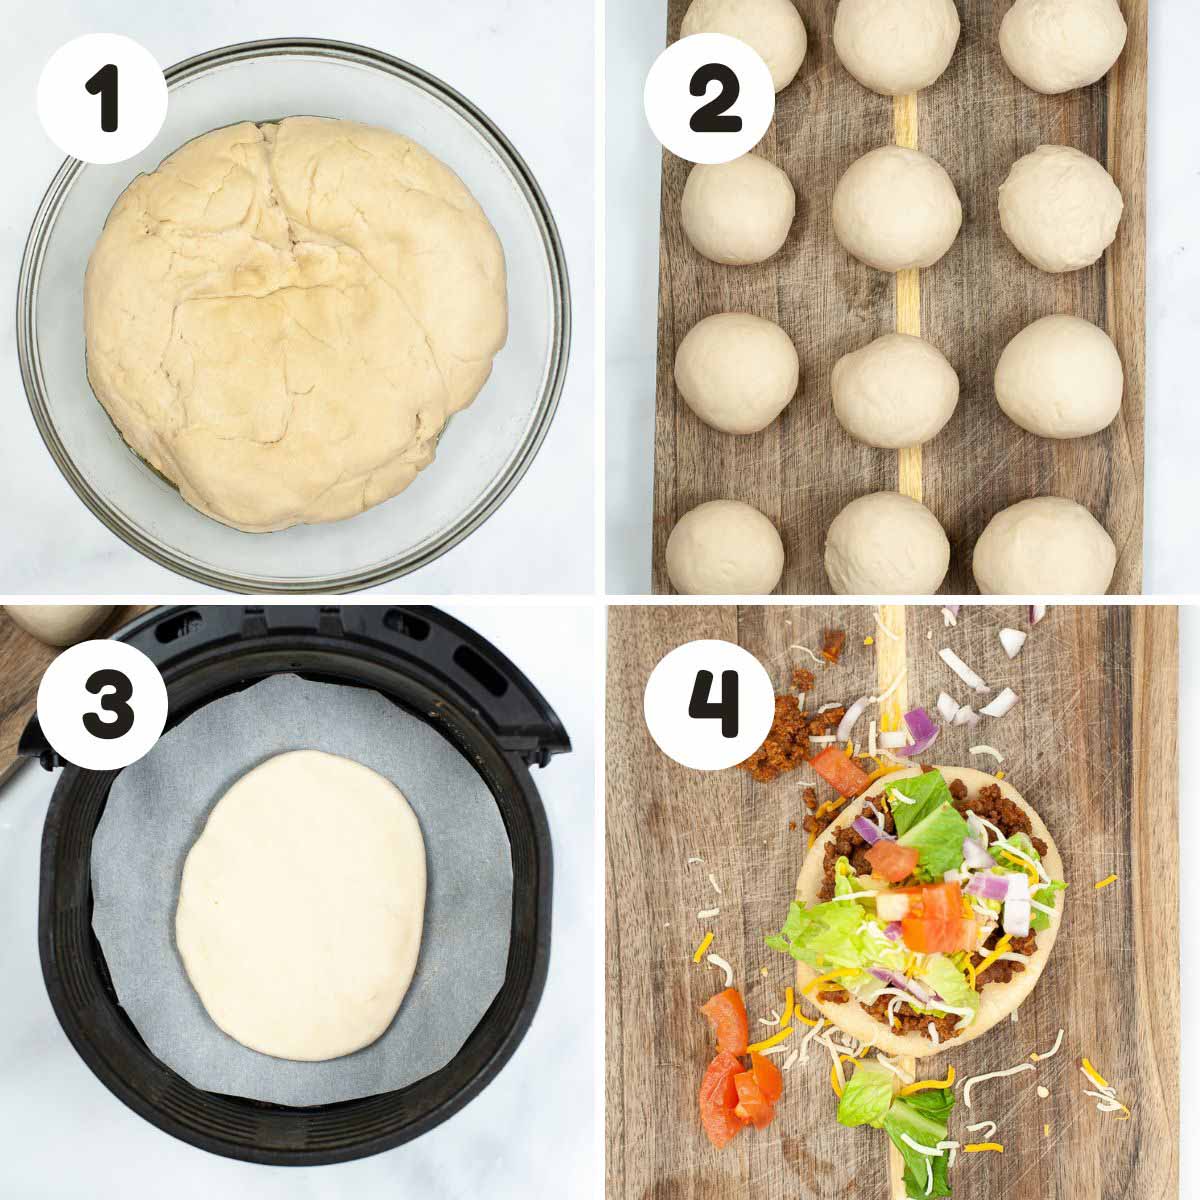 Steps to make the fry bread.